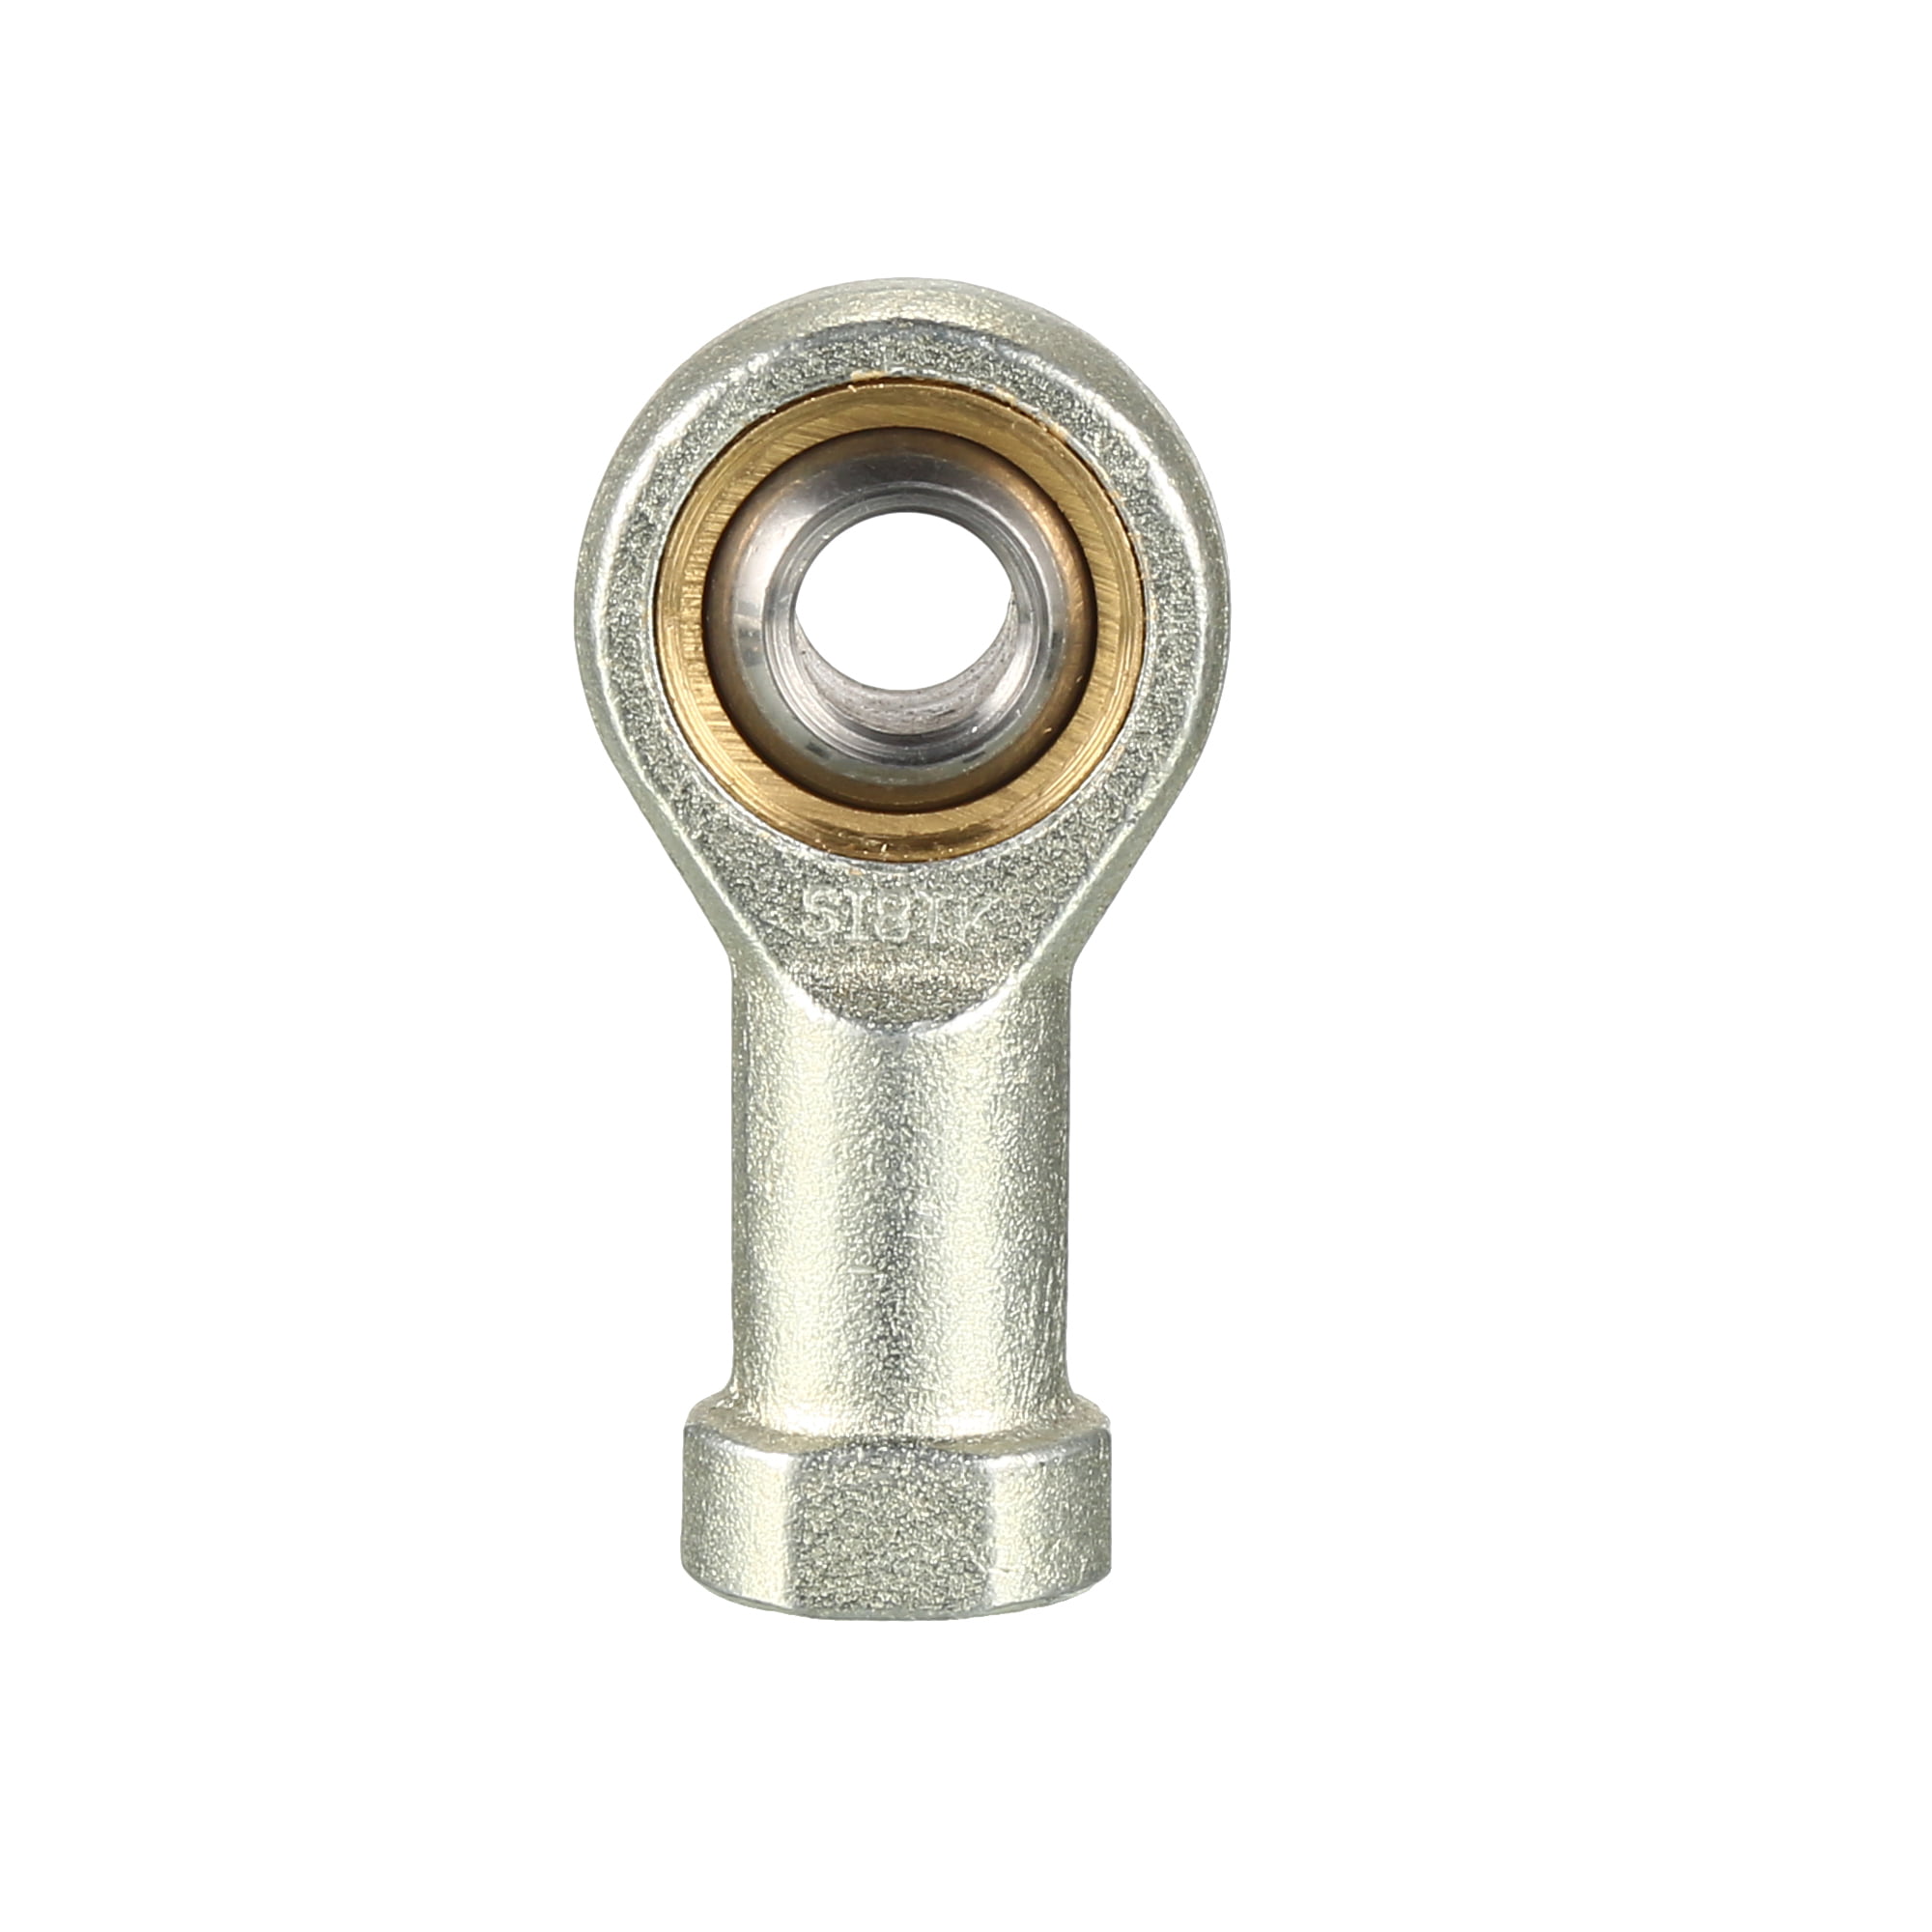 Size : Left Thread MOUNTAIN MEN Hardware Accessories 4PCS 16mm Bore Diameter POS16 Rod End Bearing M16x2.0 Thread Ball Joint Rod Ends Industrial Scientific Supplies 